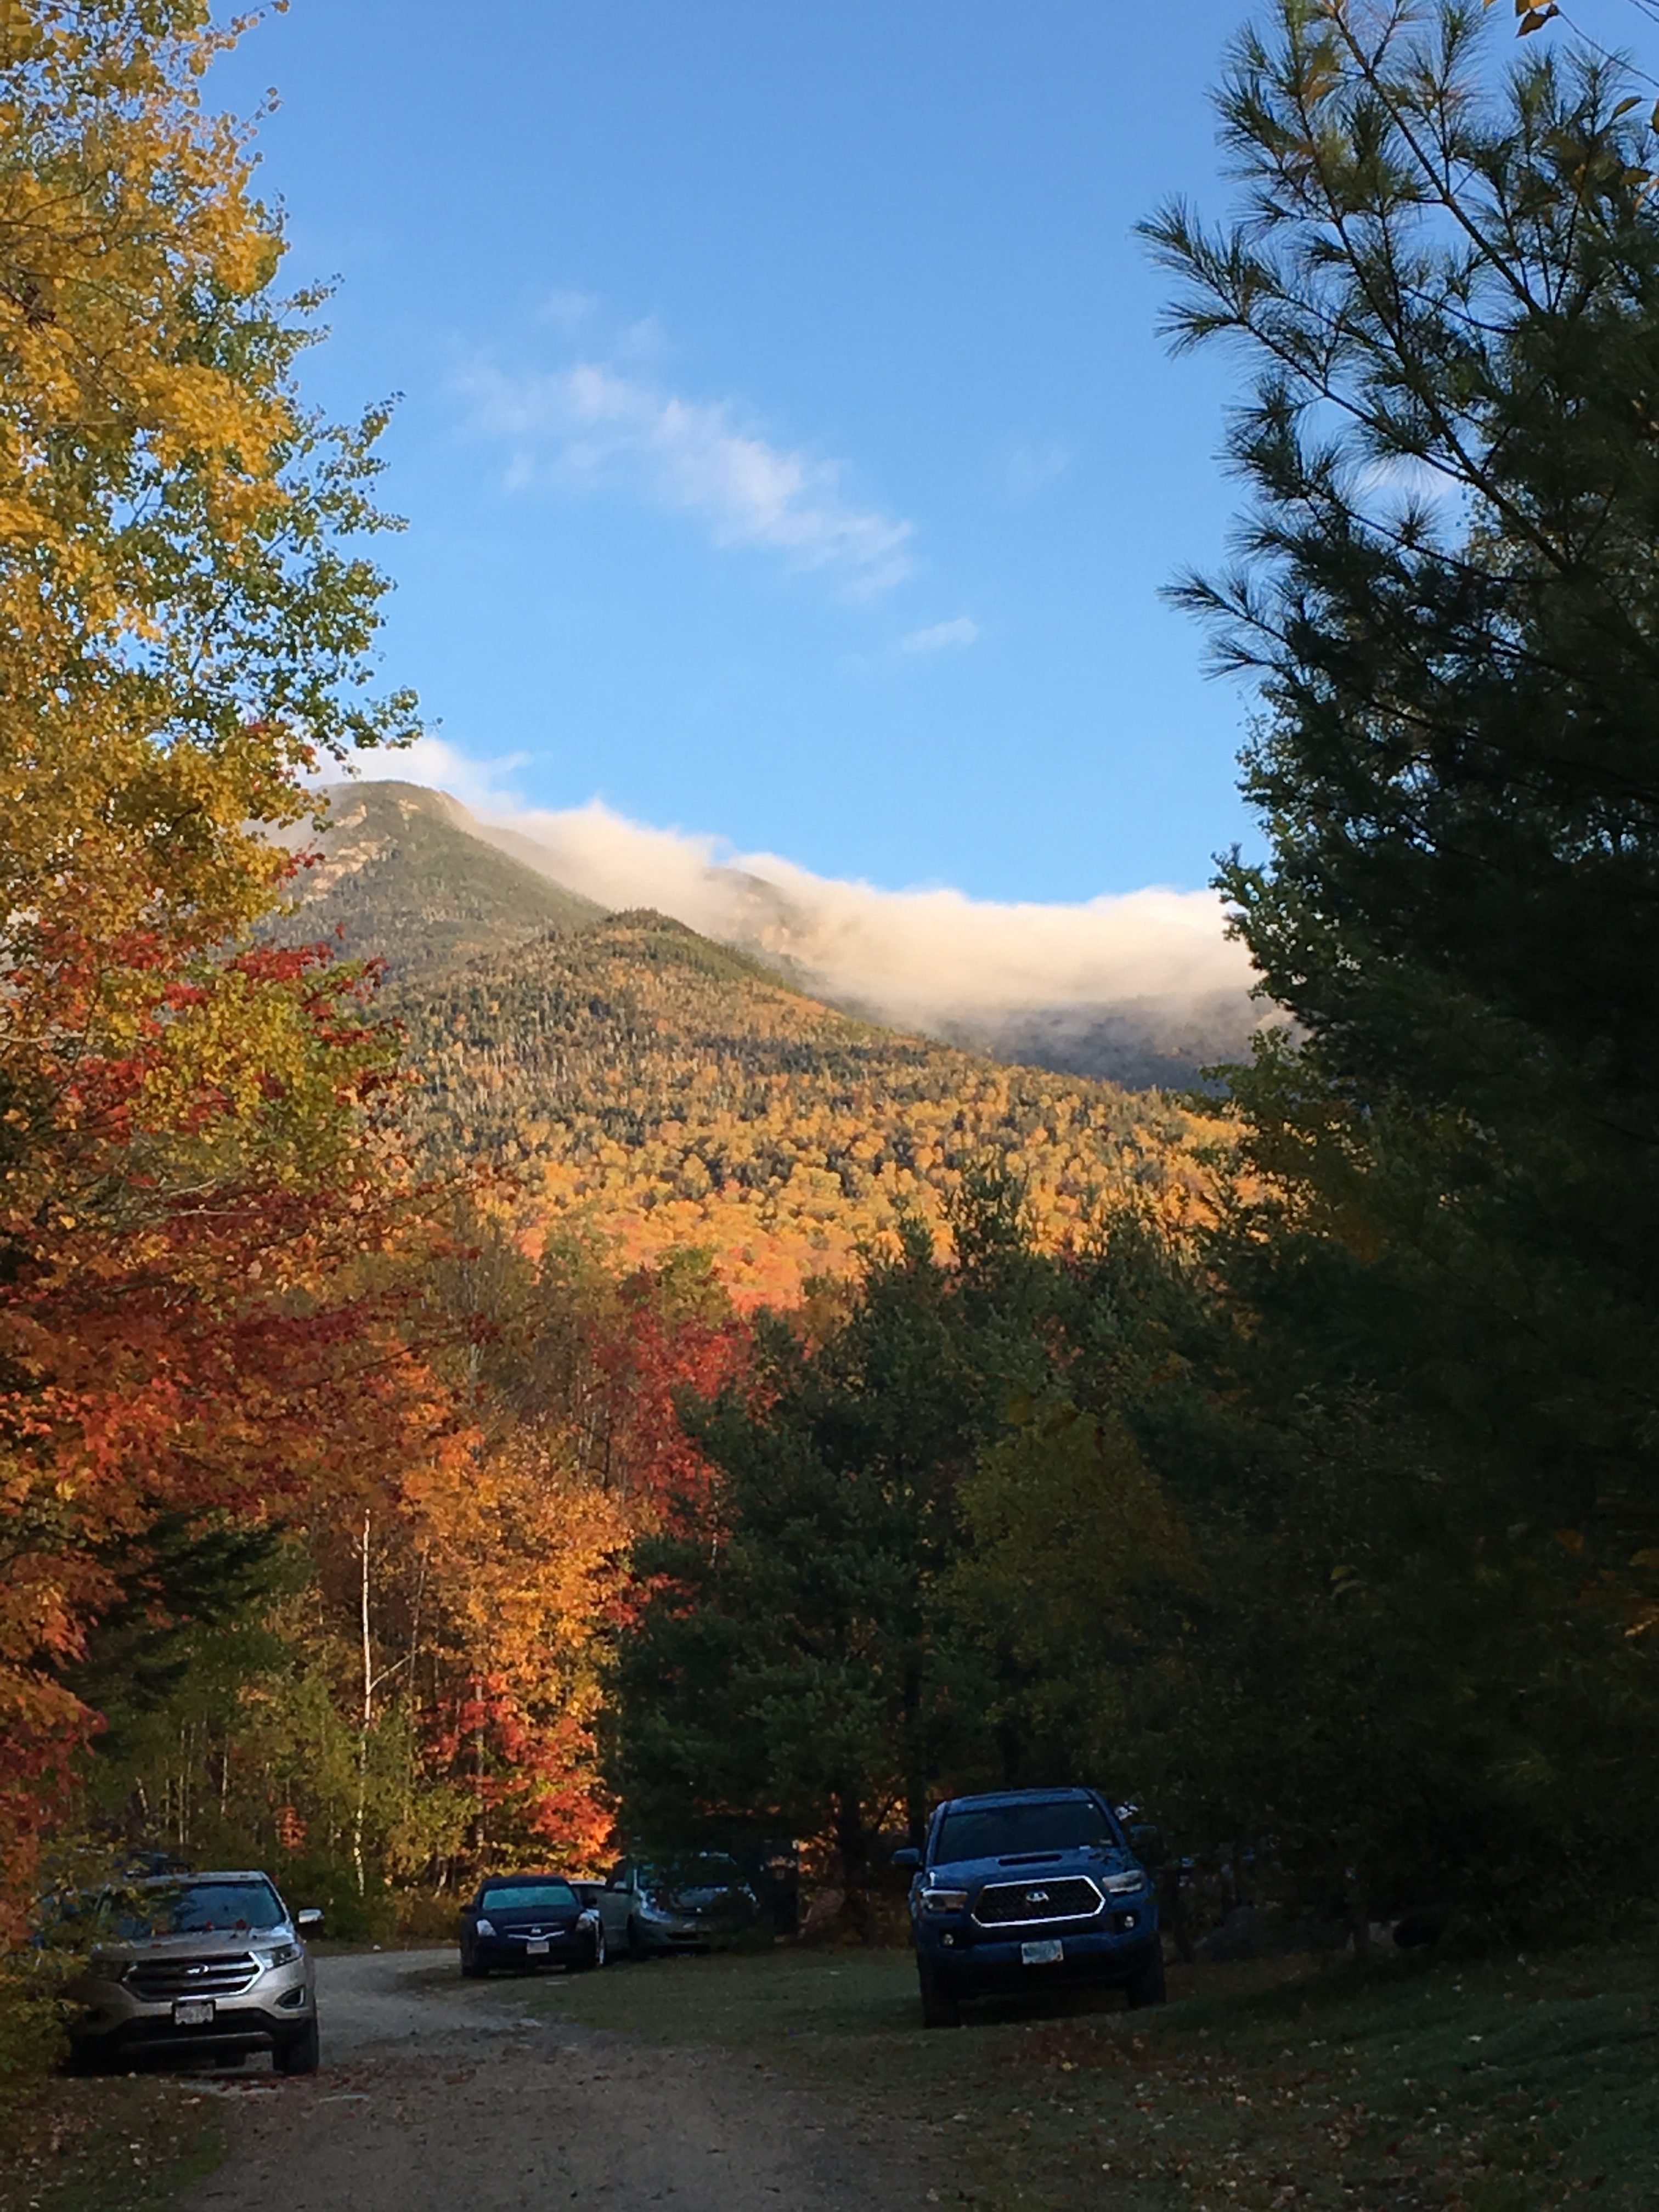 A view from the road. Trees of various colors are in the foreground; the middle ground is a mountain, which is also covered in trees; the background is clouds around the mountaintop and an otherwise-empty bright blue sky.